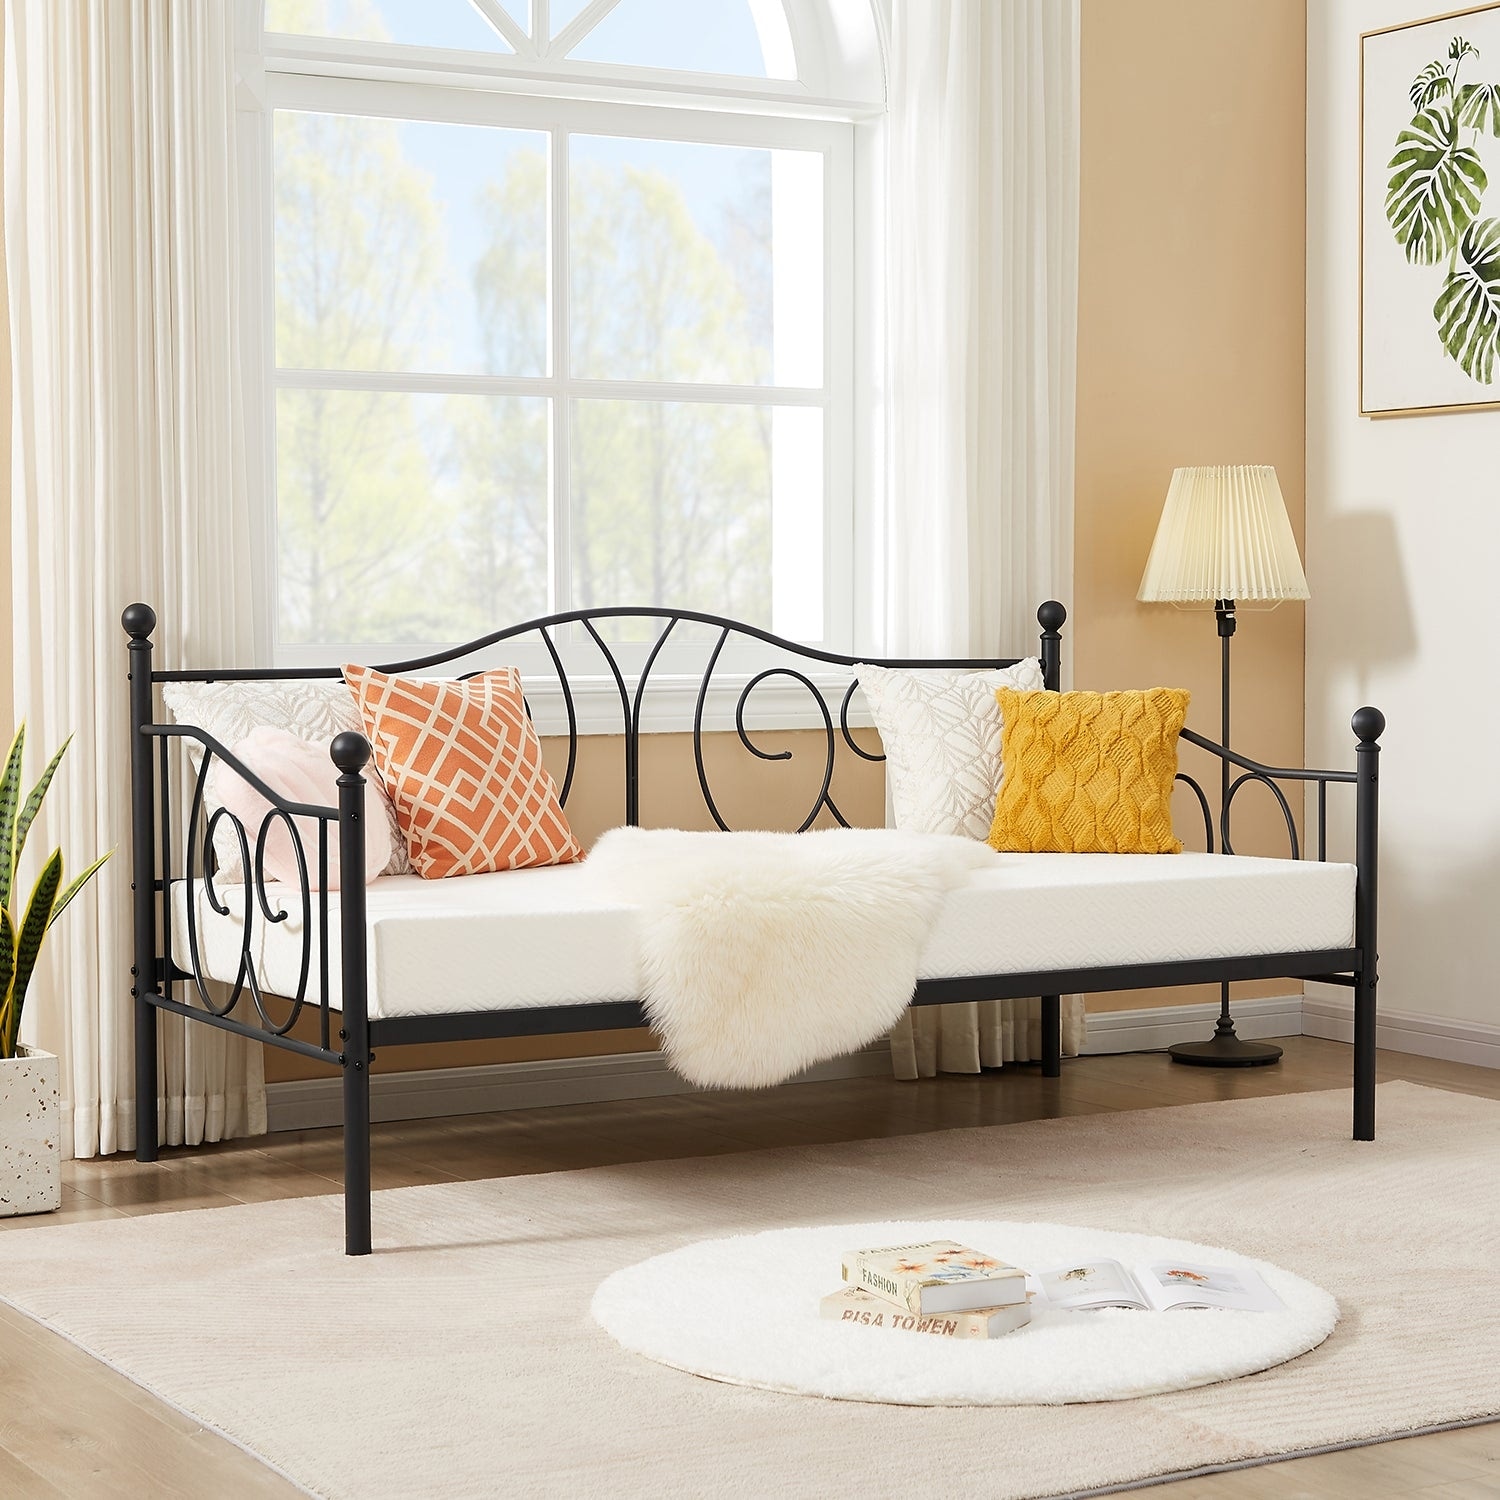 https://ak1.ostkcdn.com/images/products/is/images/direct/2bfcfffc07cc4d869ee6f565a4be9451259c5718/Javlergo-Twin-Metal-Daybed-Frame-with-Slats%2C-Classic-Mattress-Foundation%2C-No-Box-Spring-Needed.jpg